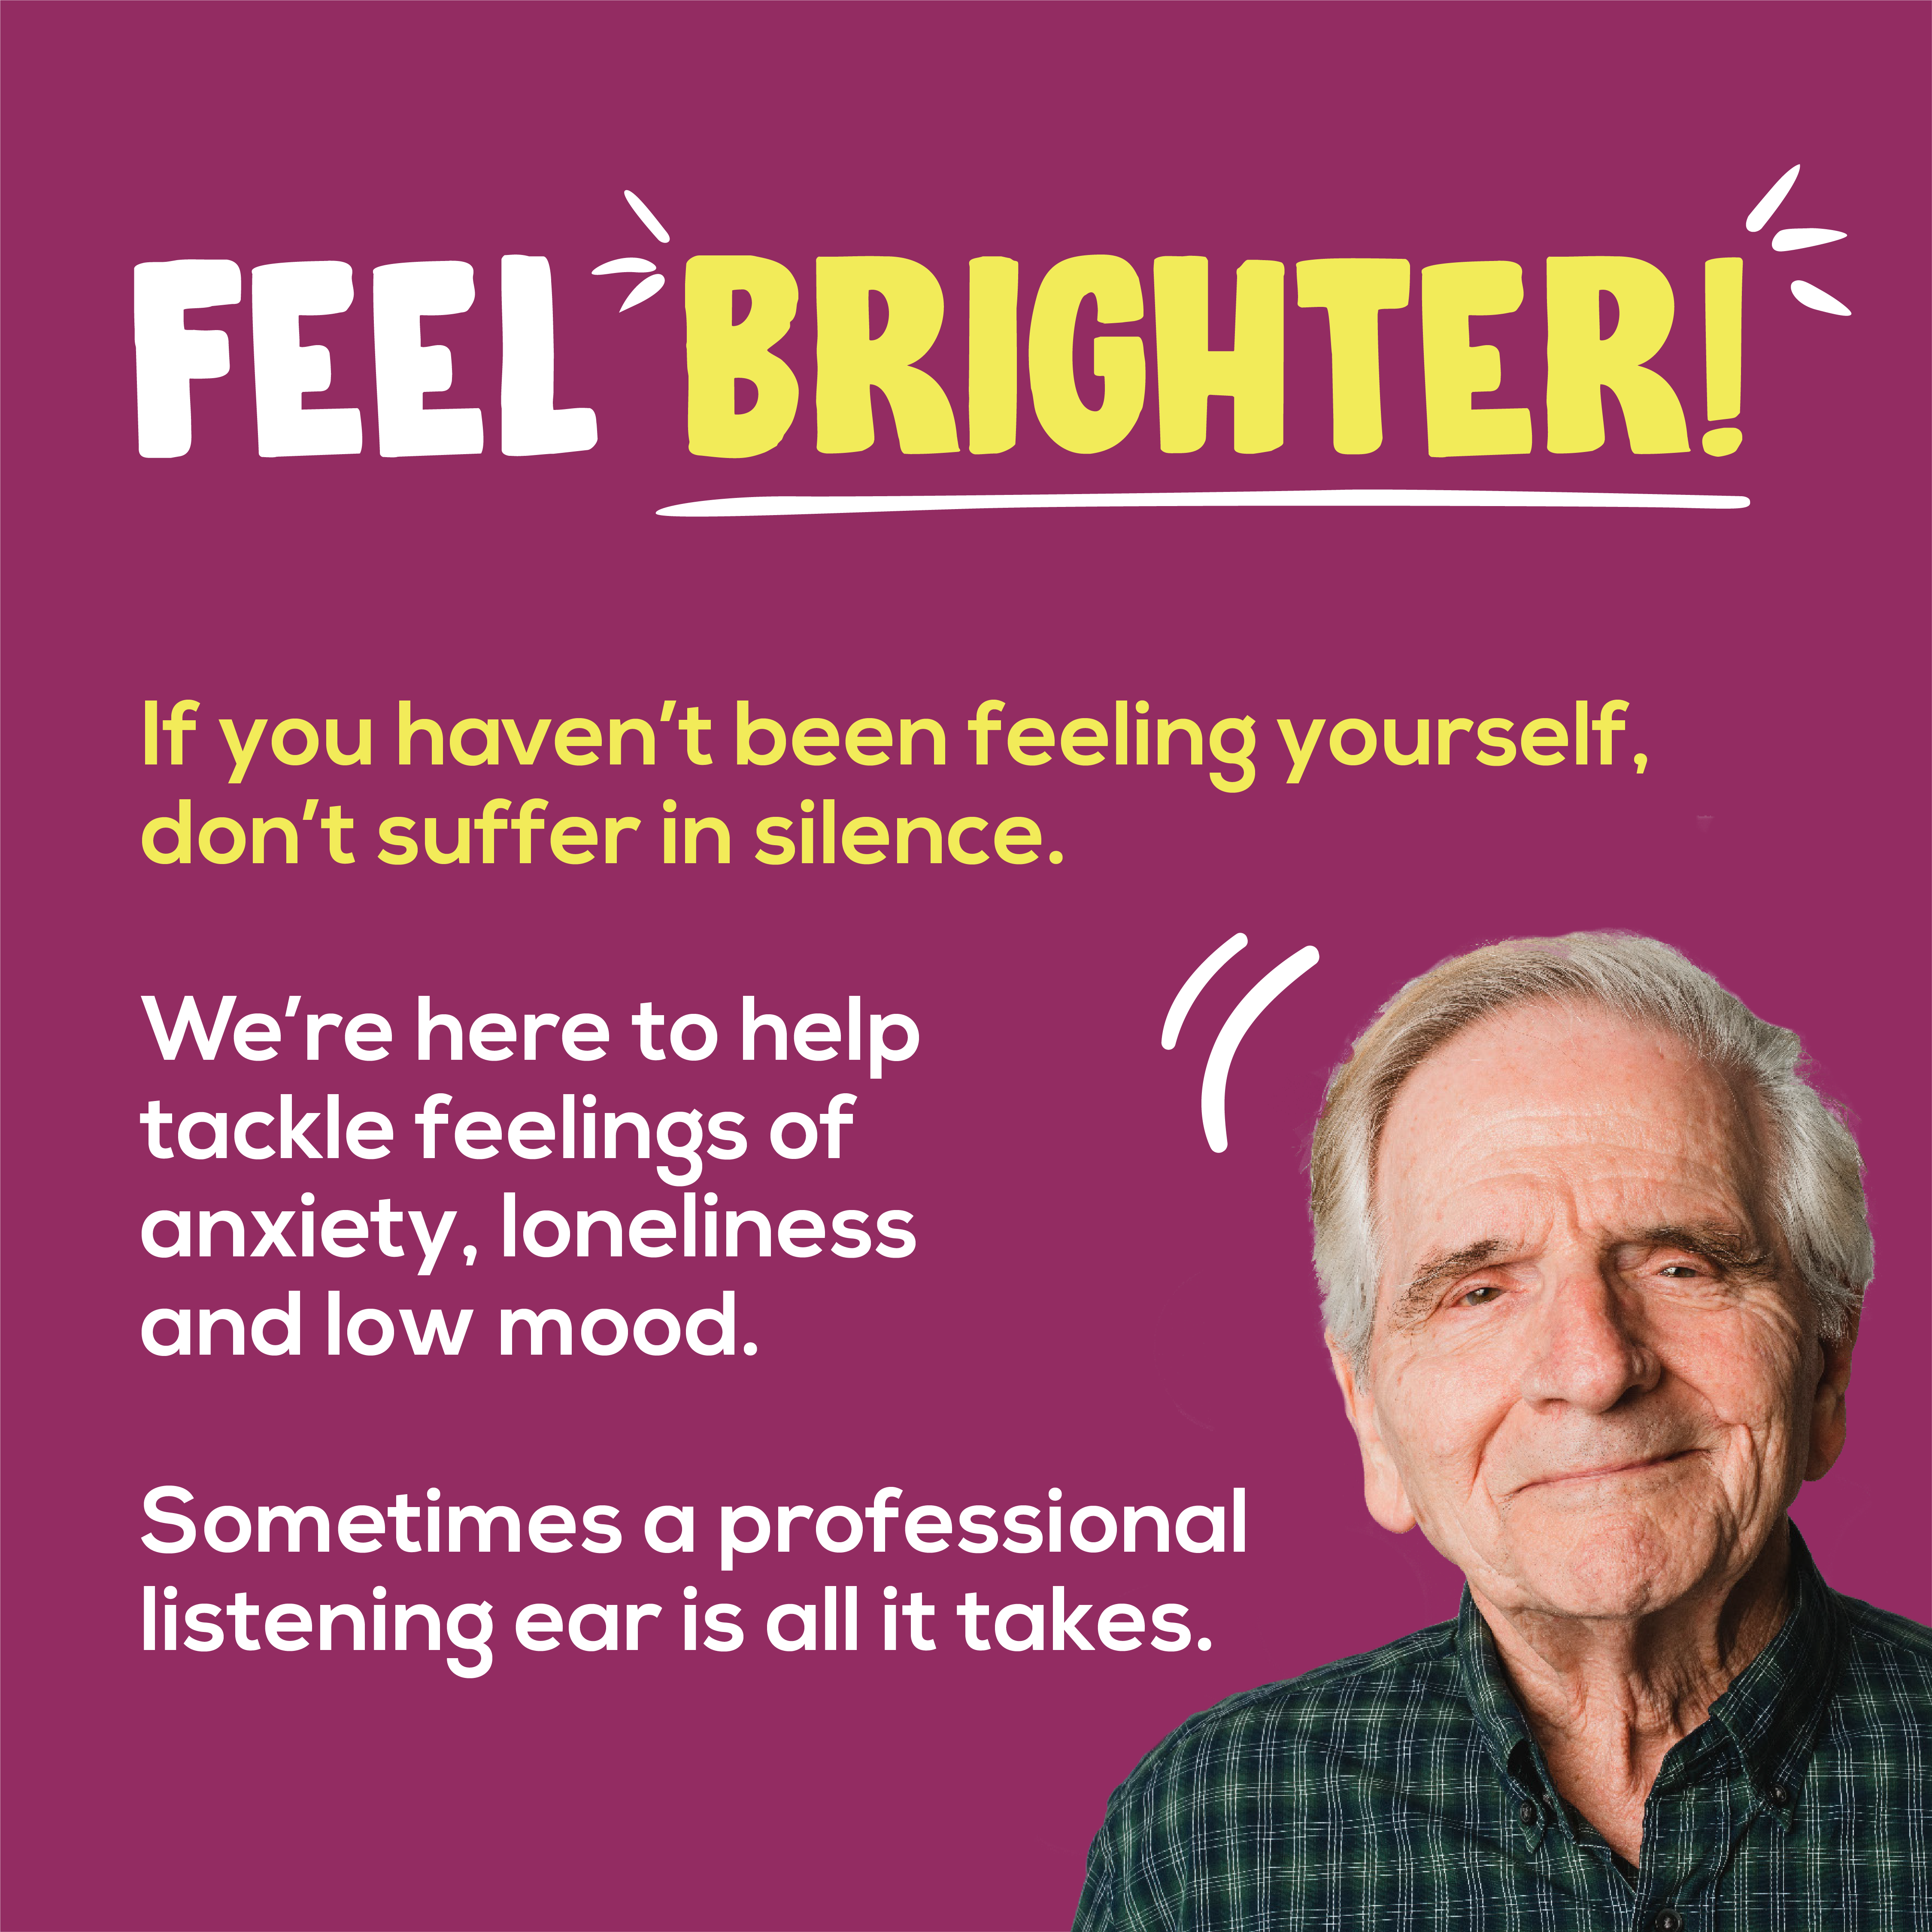 NHS ‘Feel Brighter’ Campaign for over 65s